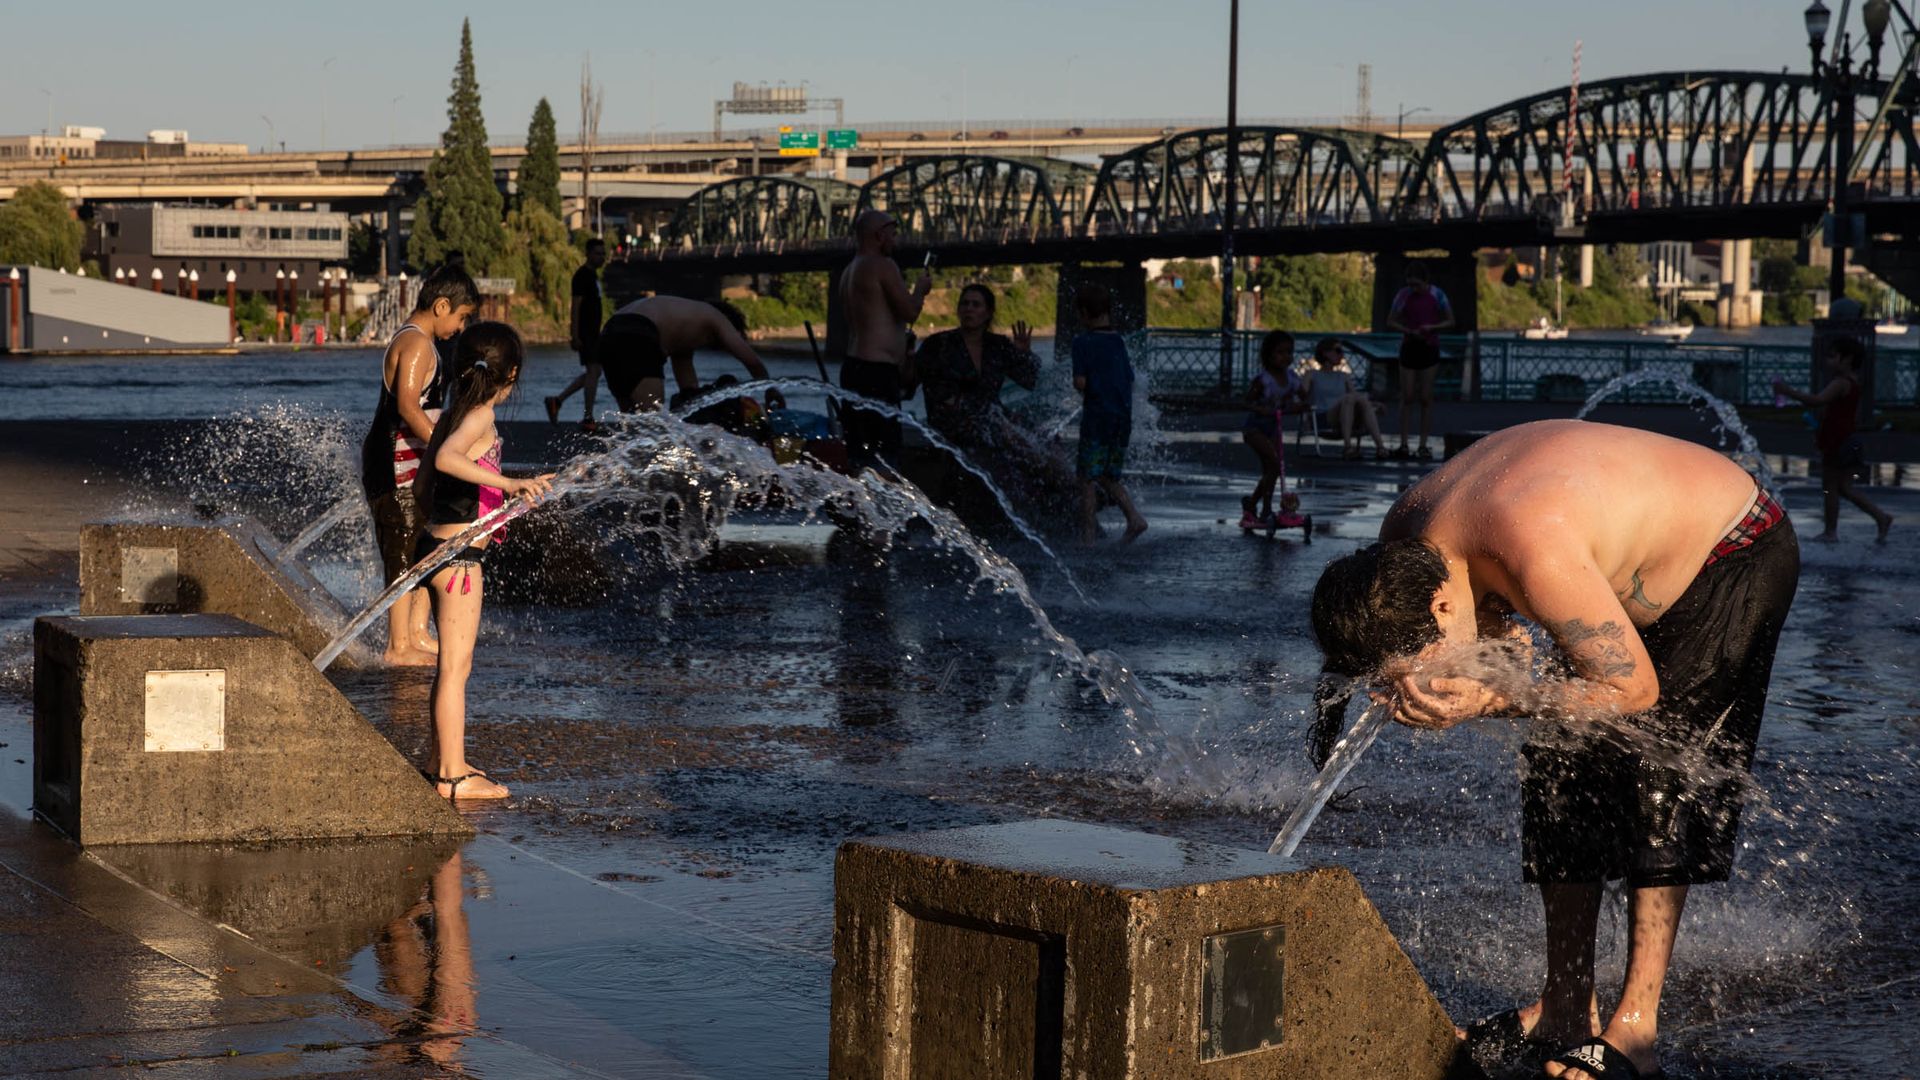 Children play at a water fountain splash park in Oregon during a record heat wave.